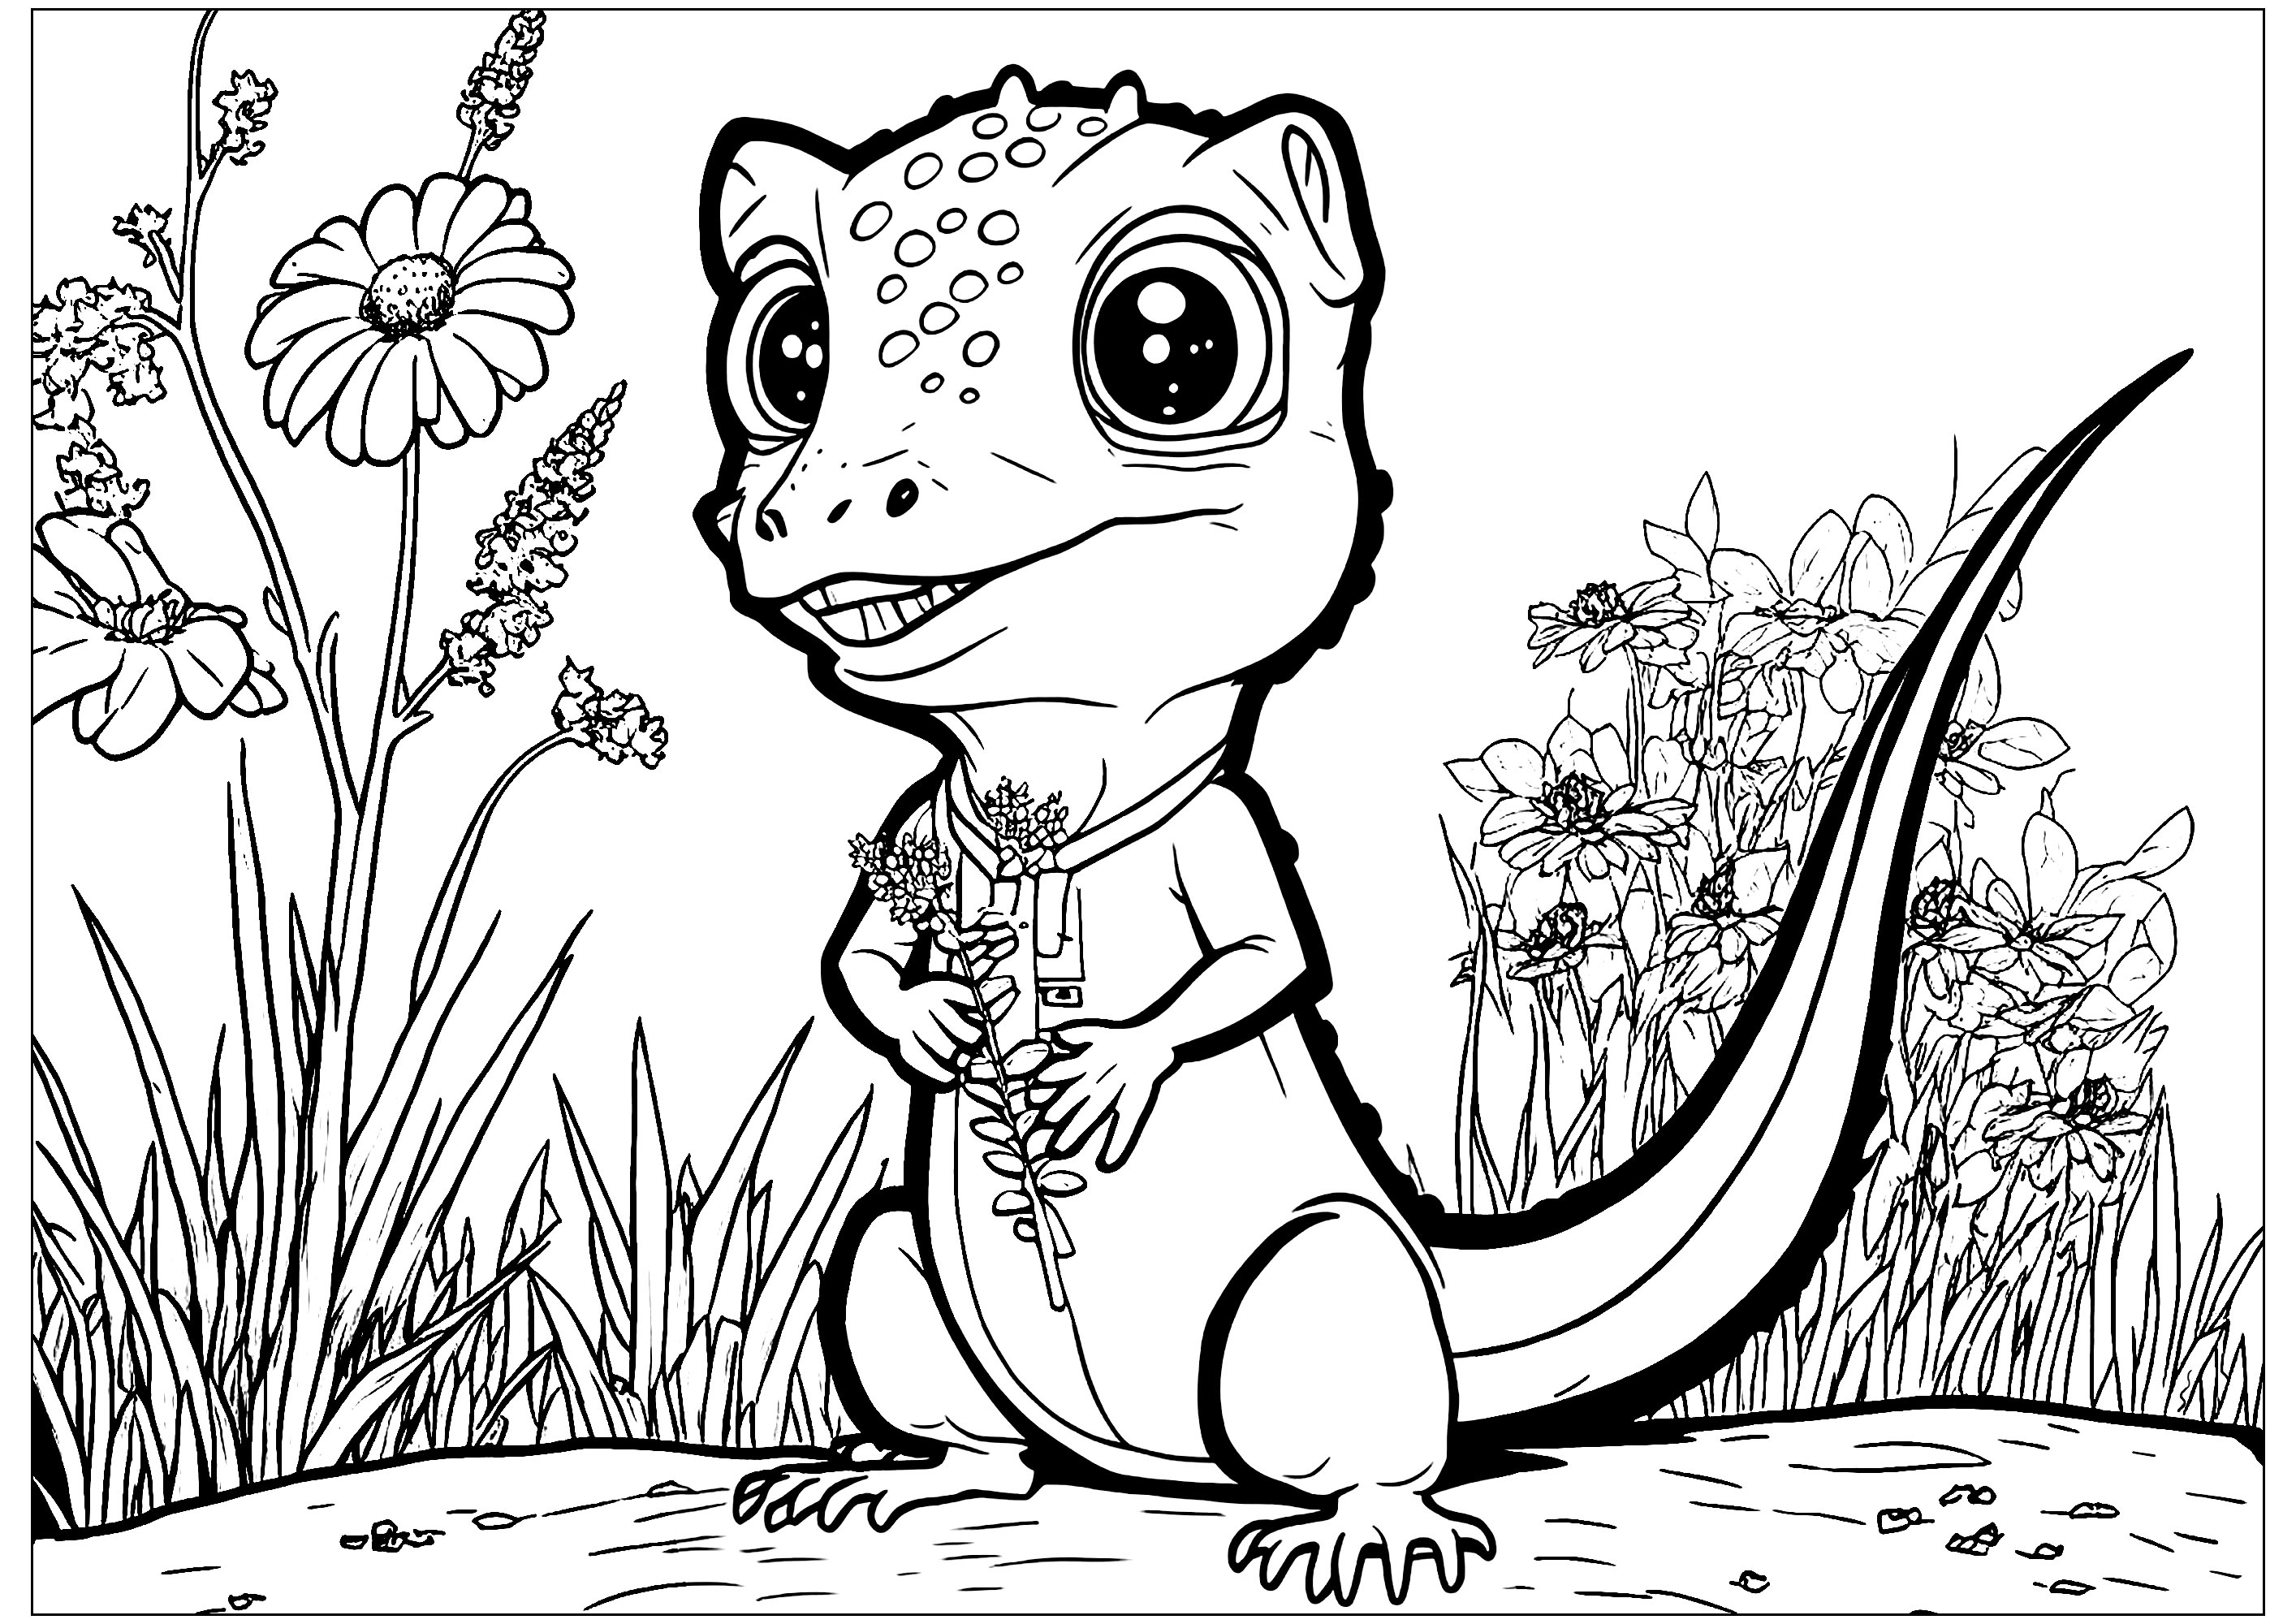 Coloring of a small lizard in cartoon style